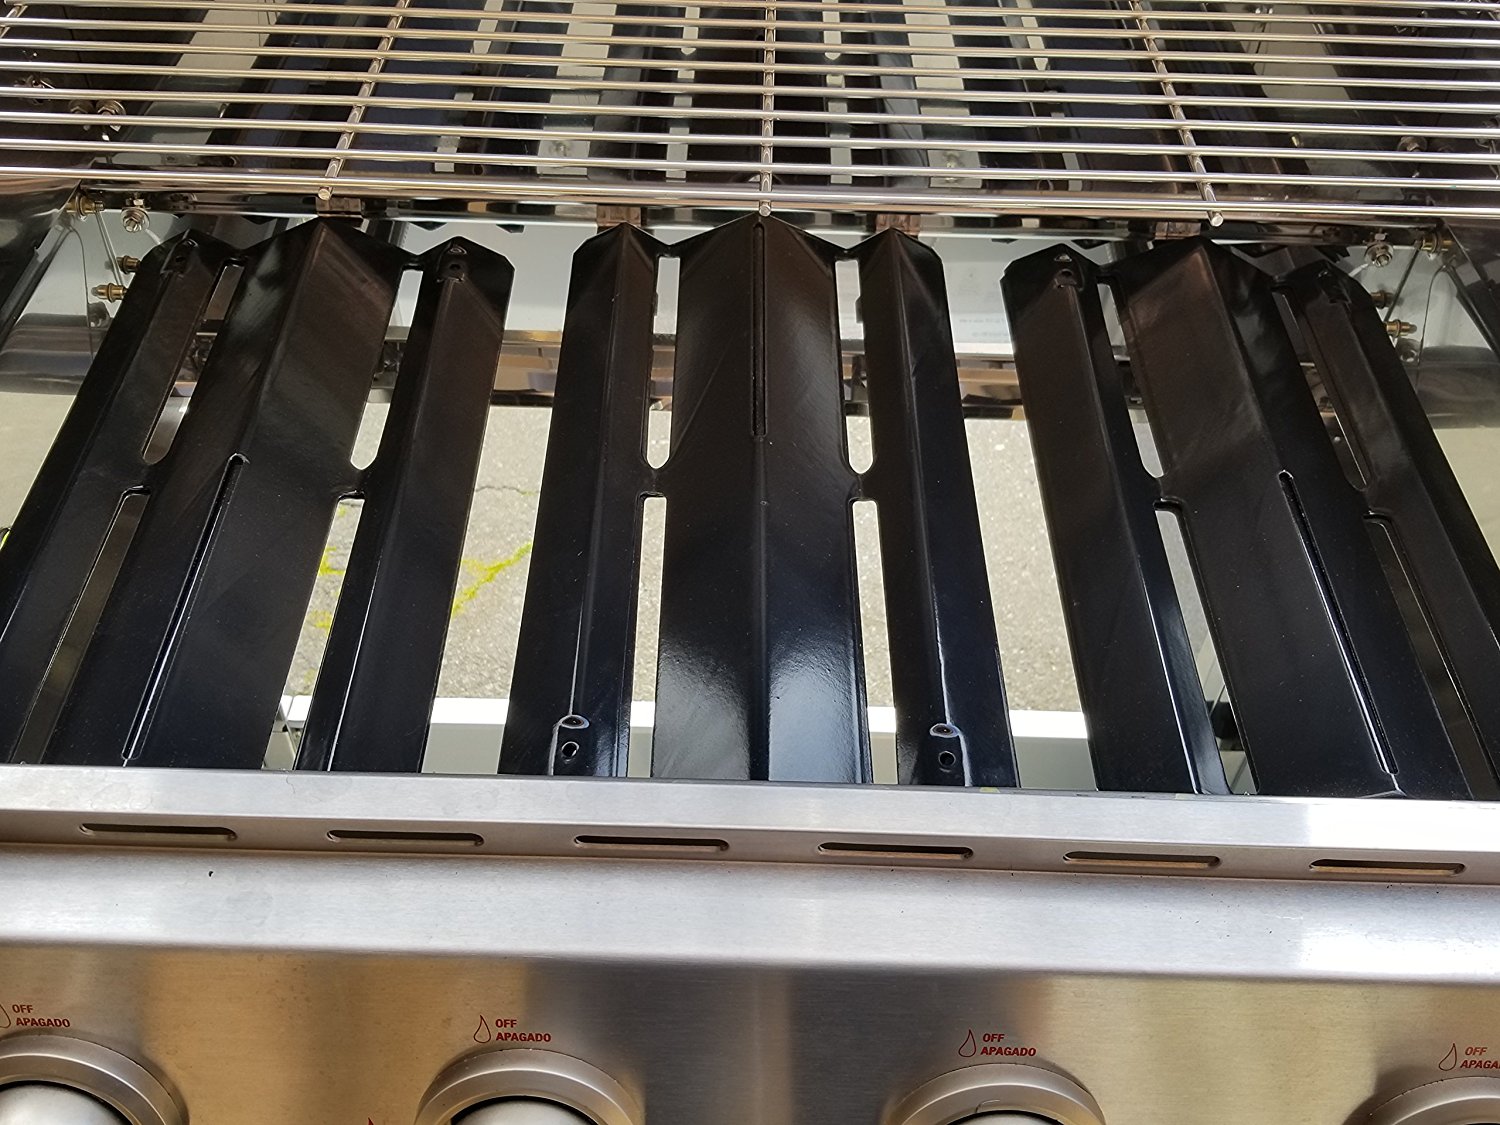 Set of Three Heavy duty porcelain coated heat plates for Char-broil, Kenmore, Master Chef and other Bbq grill models - image 1 of 3